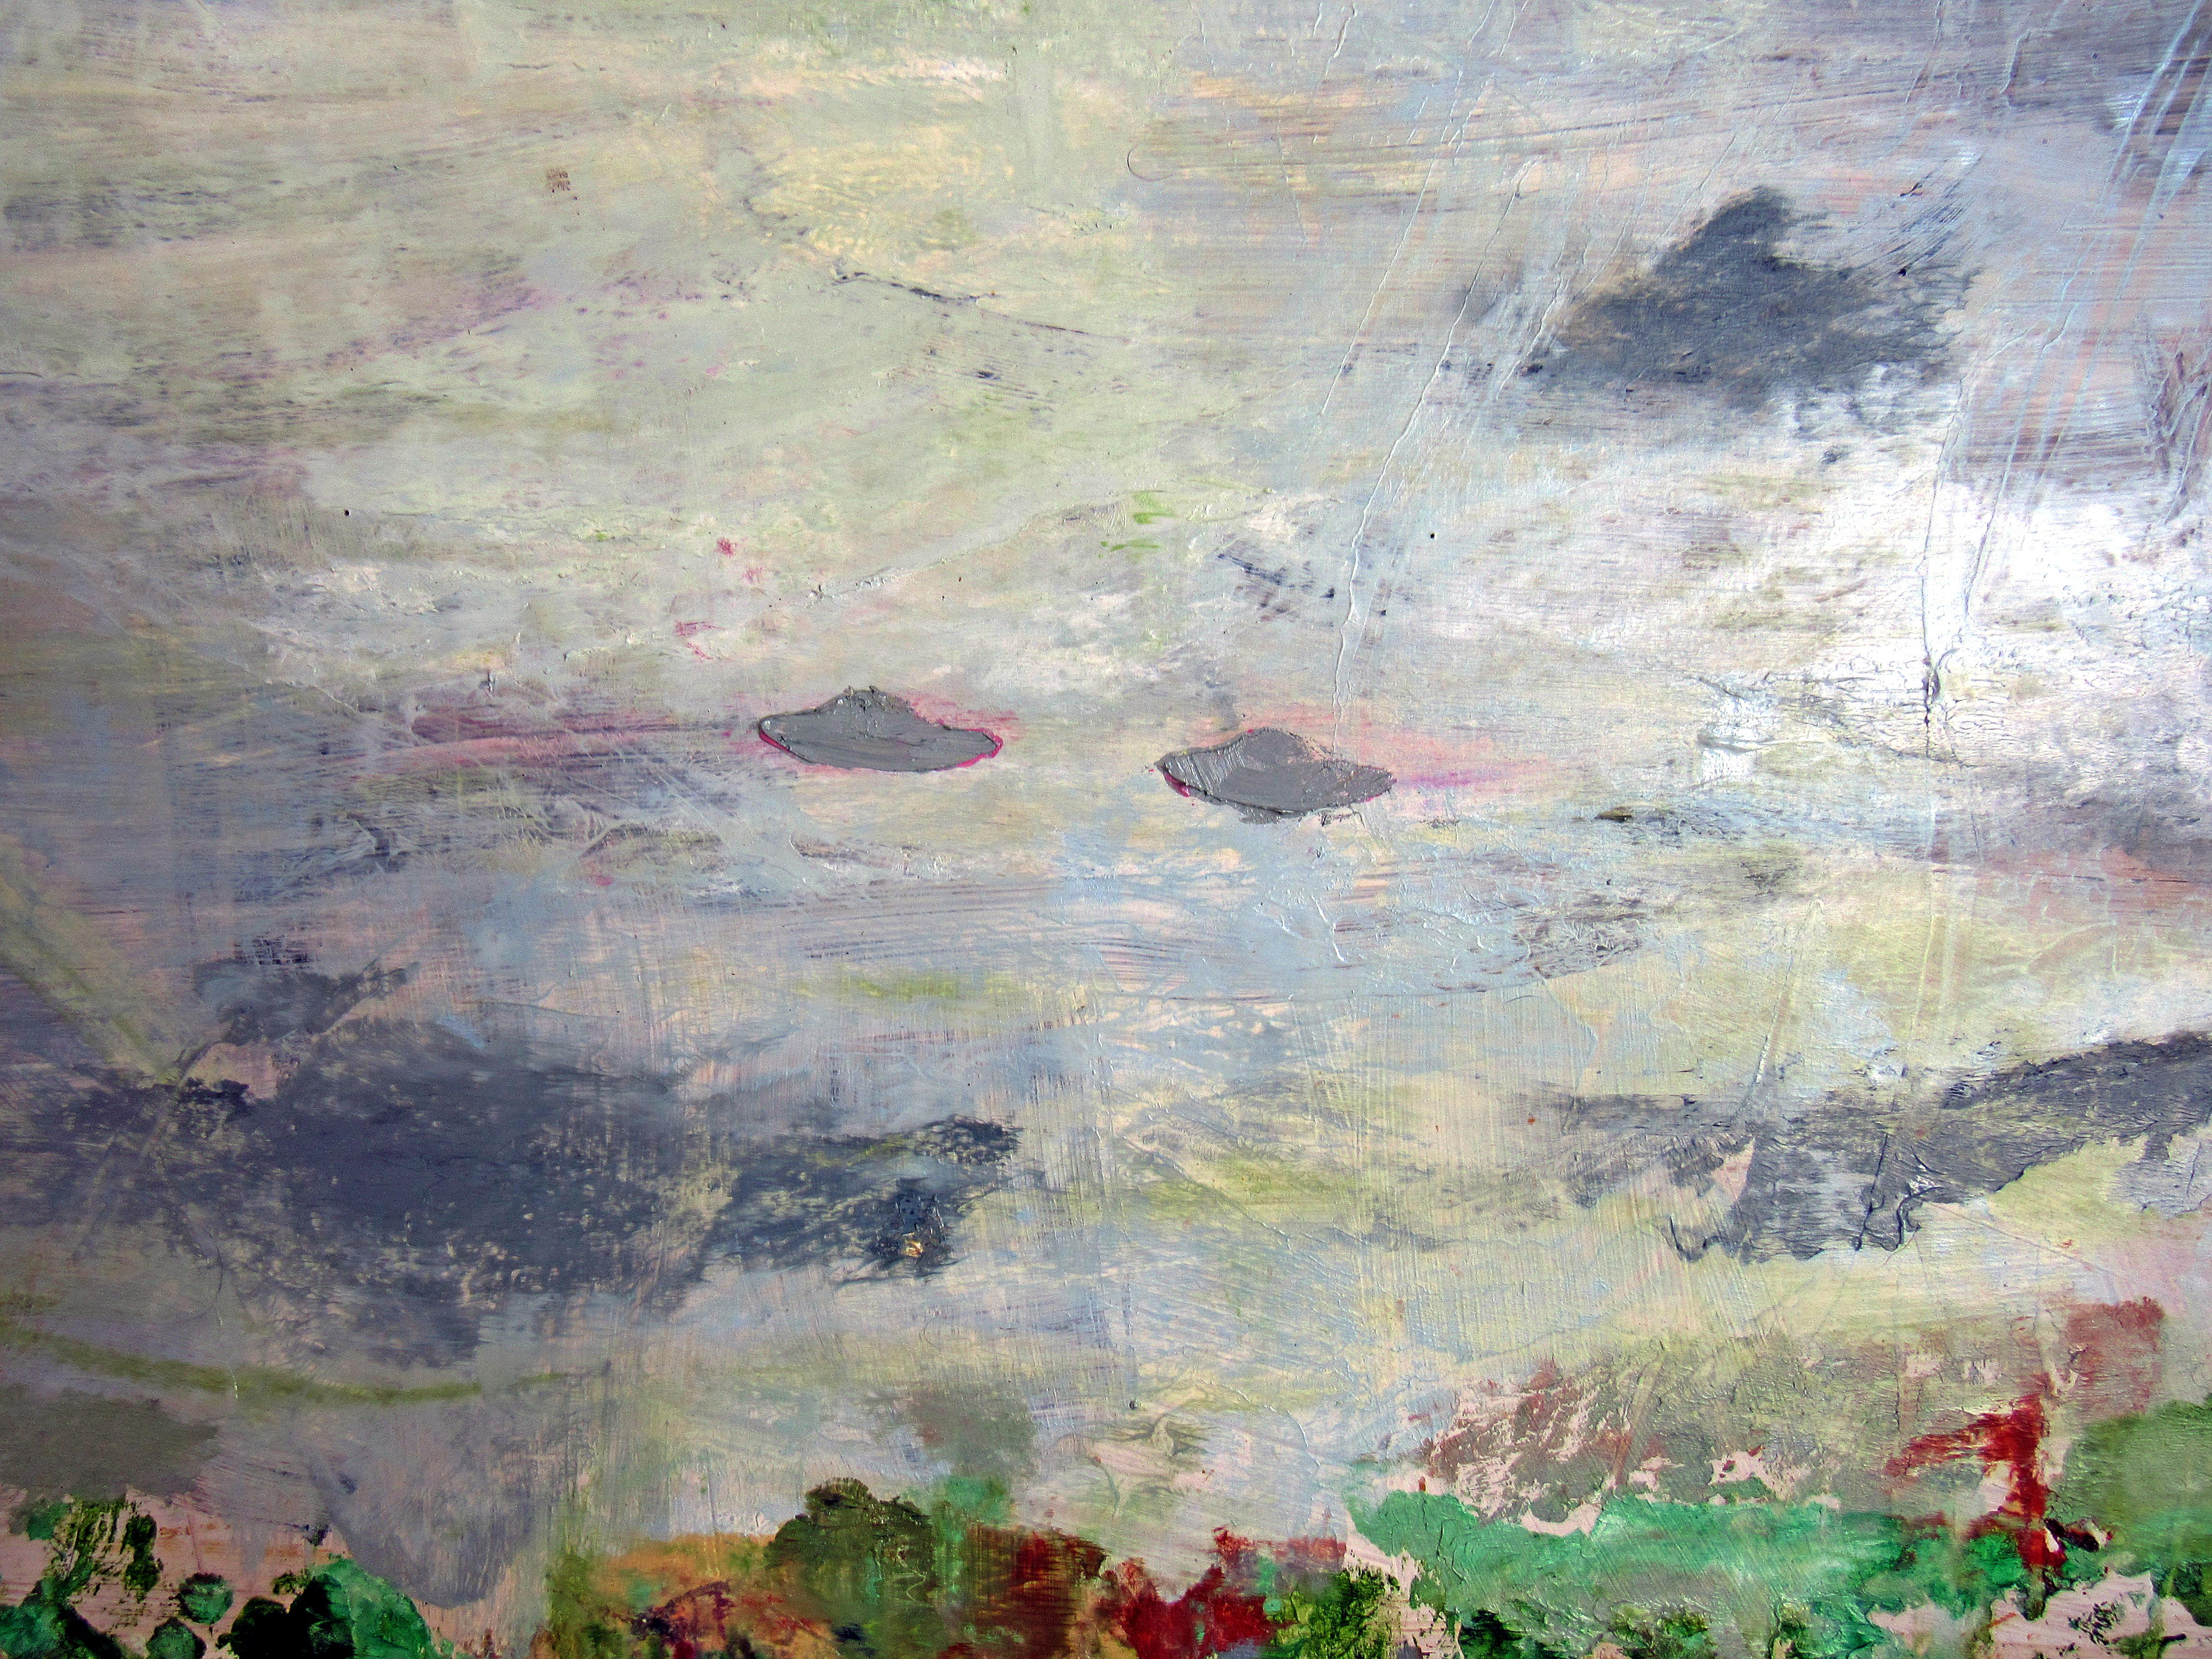 Superposition, greens, blues, abstracted landscape w subtle UFOs in sky - Abstract Painting by C. Dimitri